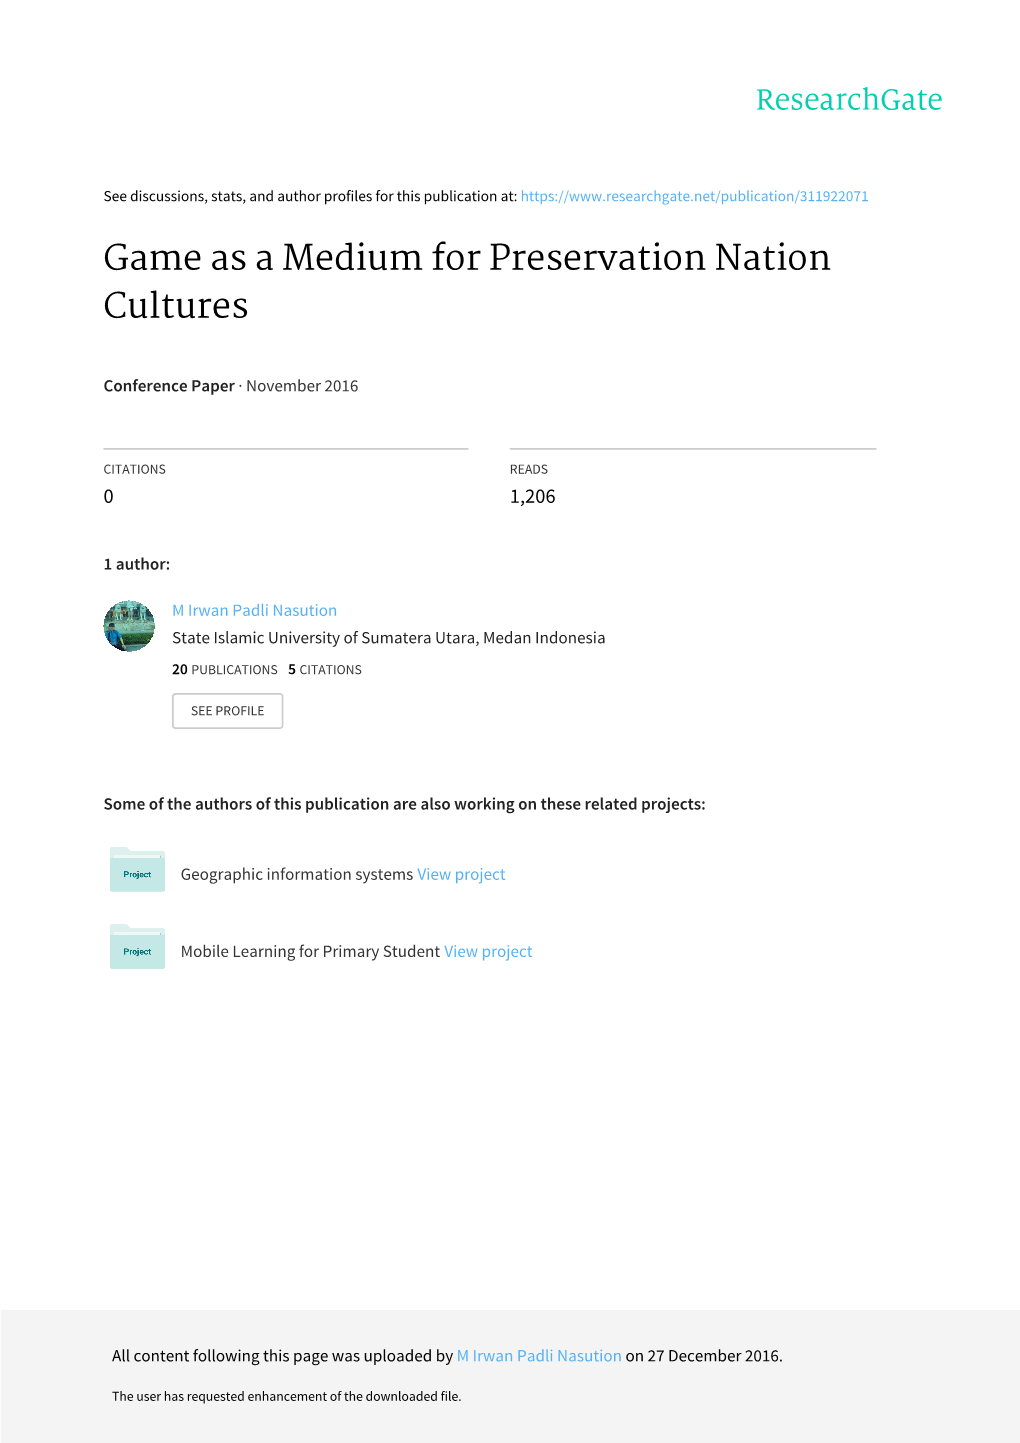 Game As a Medium for Preservation Nation Cultures